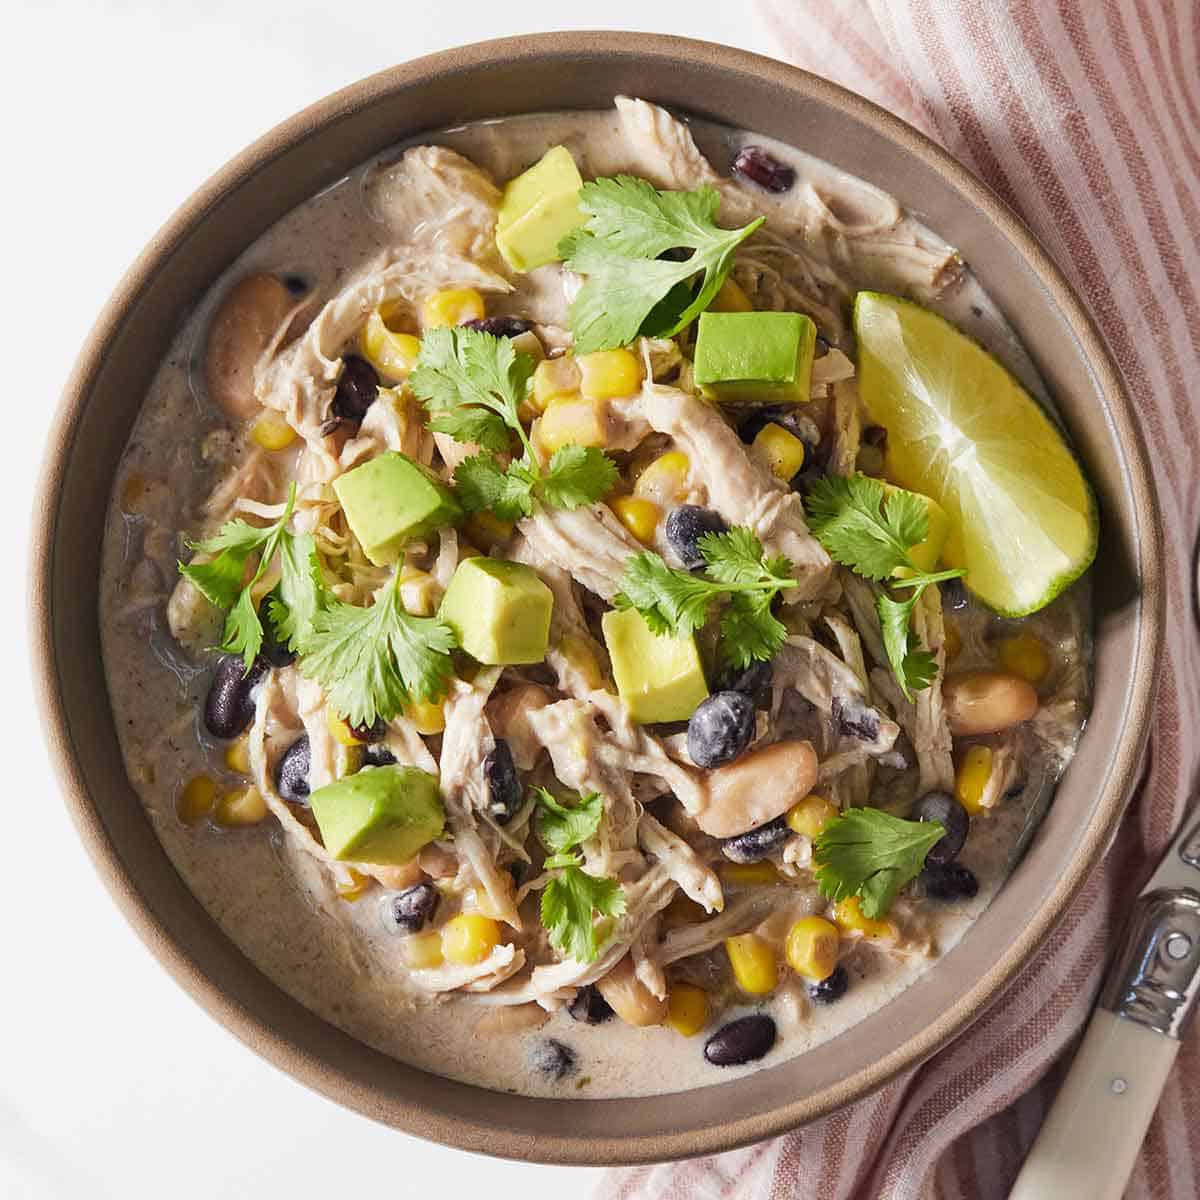 https://cookingwithcoit.com/wp-content/uploads/2021/10/CARD-Instant-Pot-White-Chicken-Chili.jpg